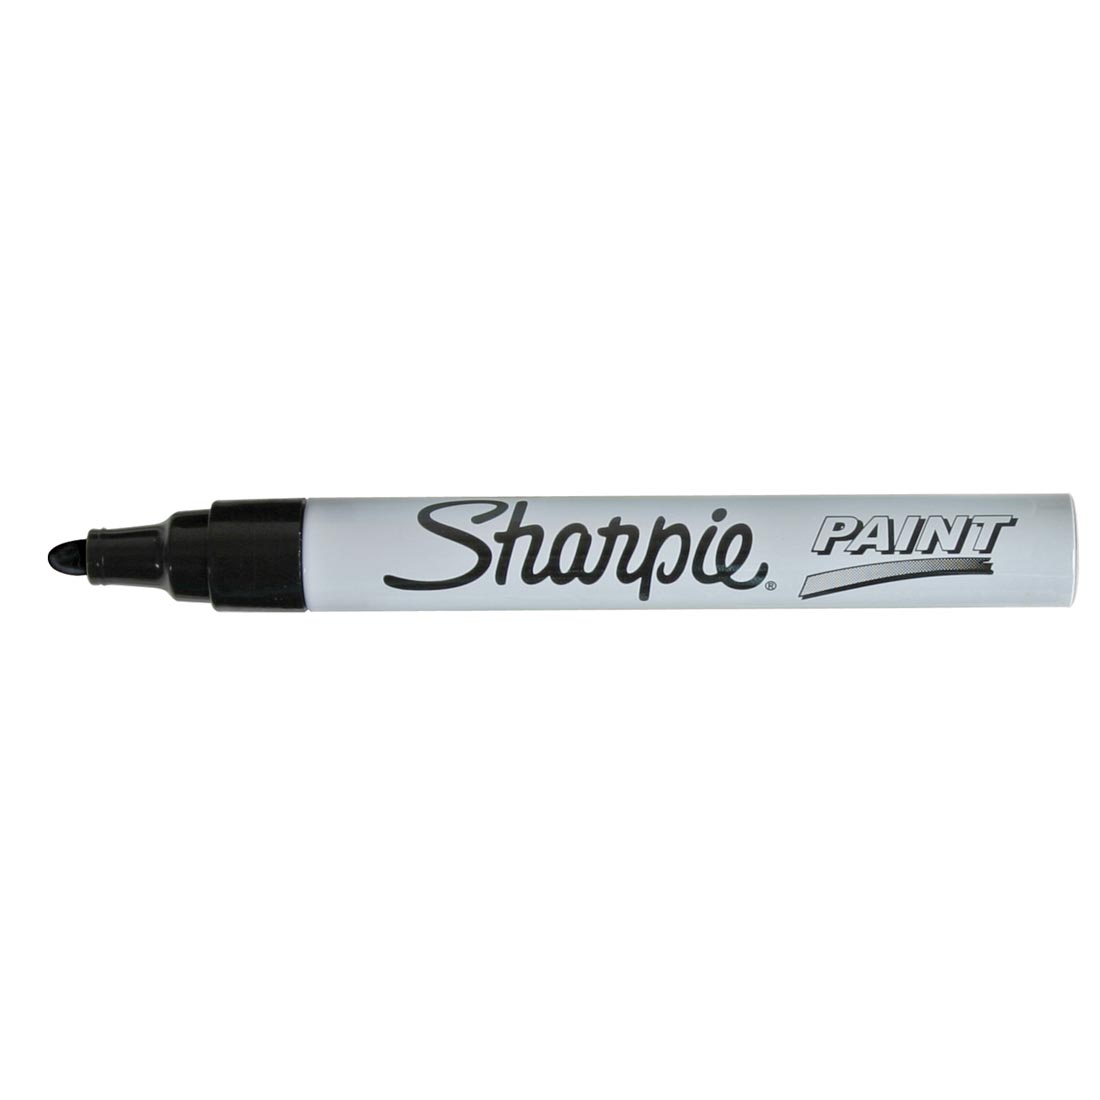 Black Sharpie Oil-Based Medium Point Paint Marker with cap off